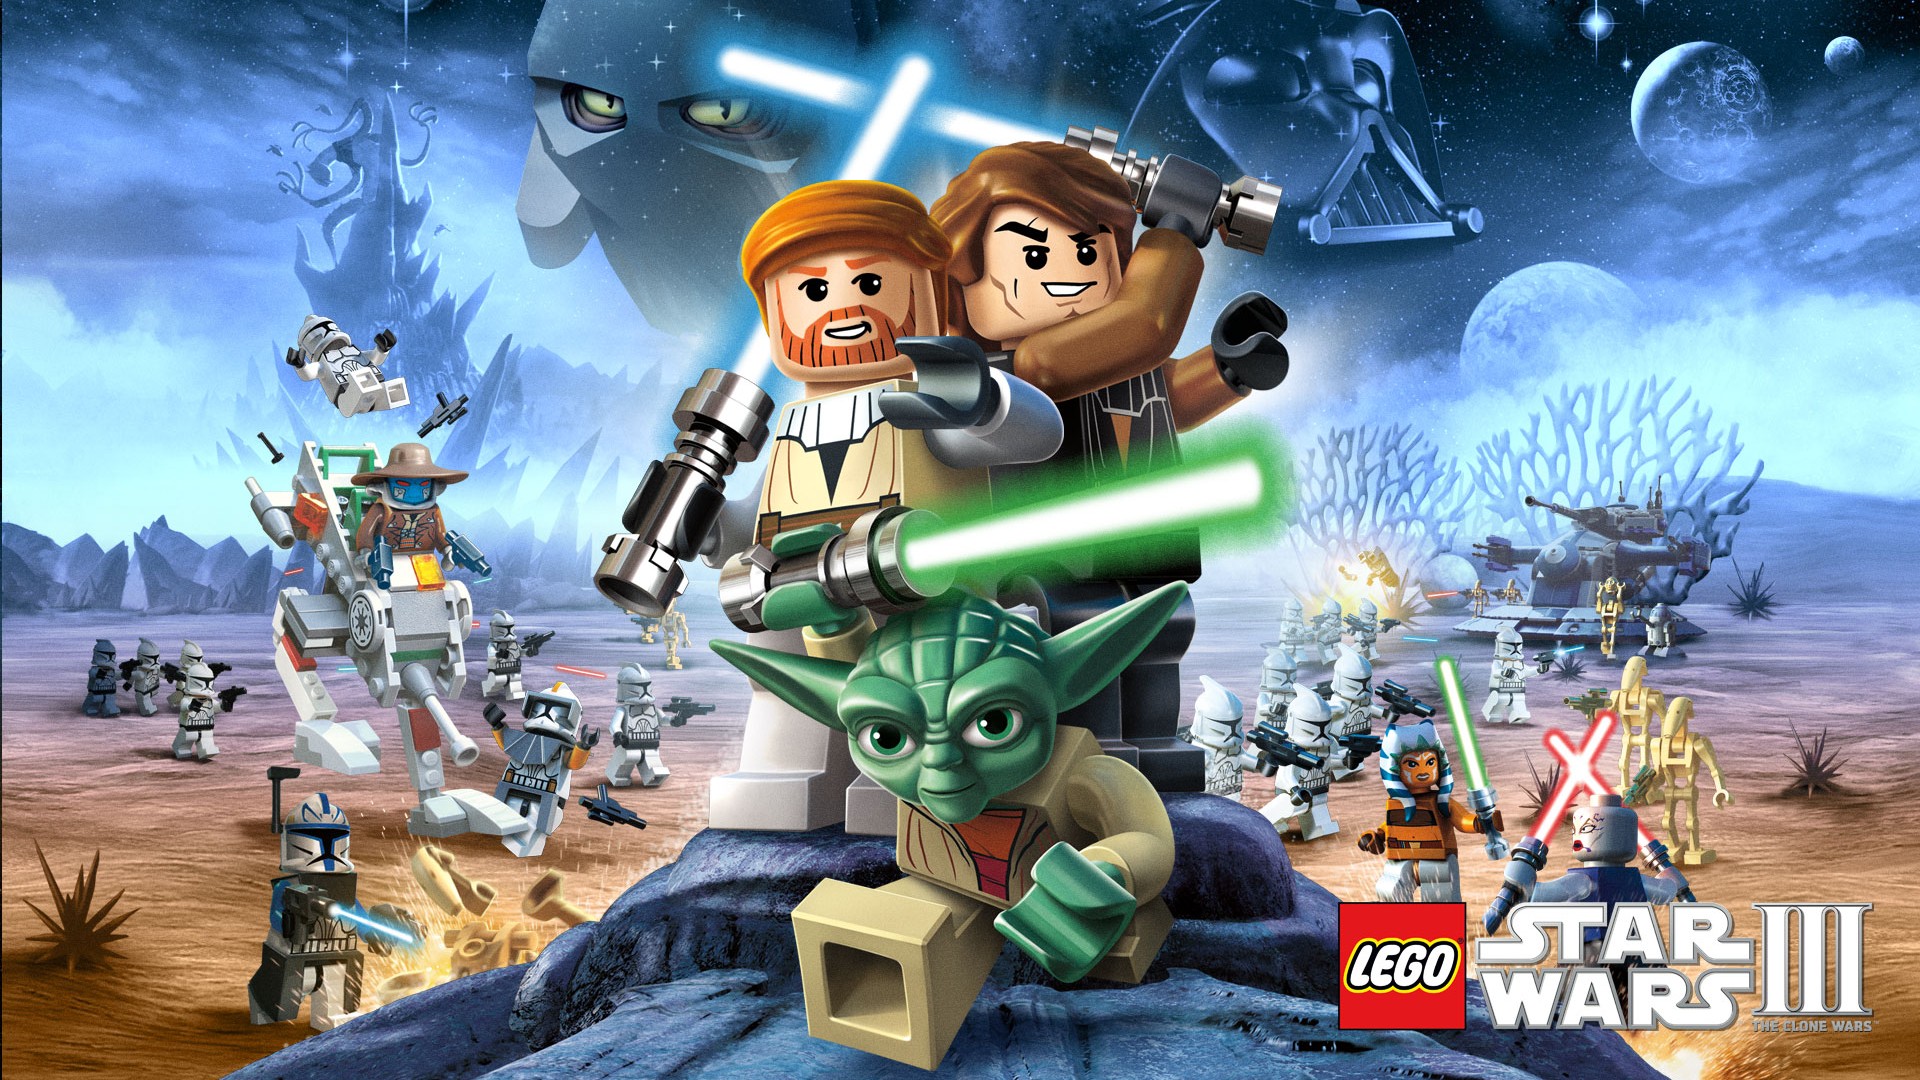 3 Lego Star Wars III: The Clone Wars HD Wallpapers | Backgrounds